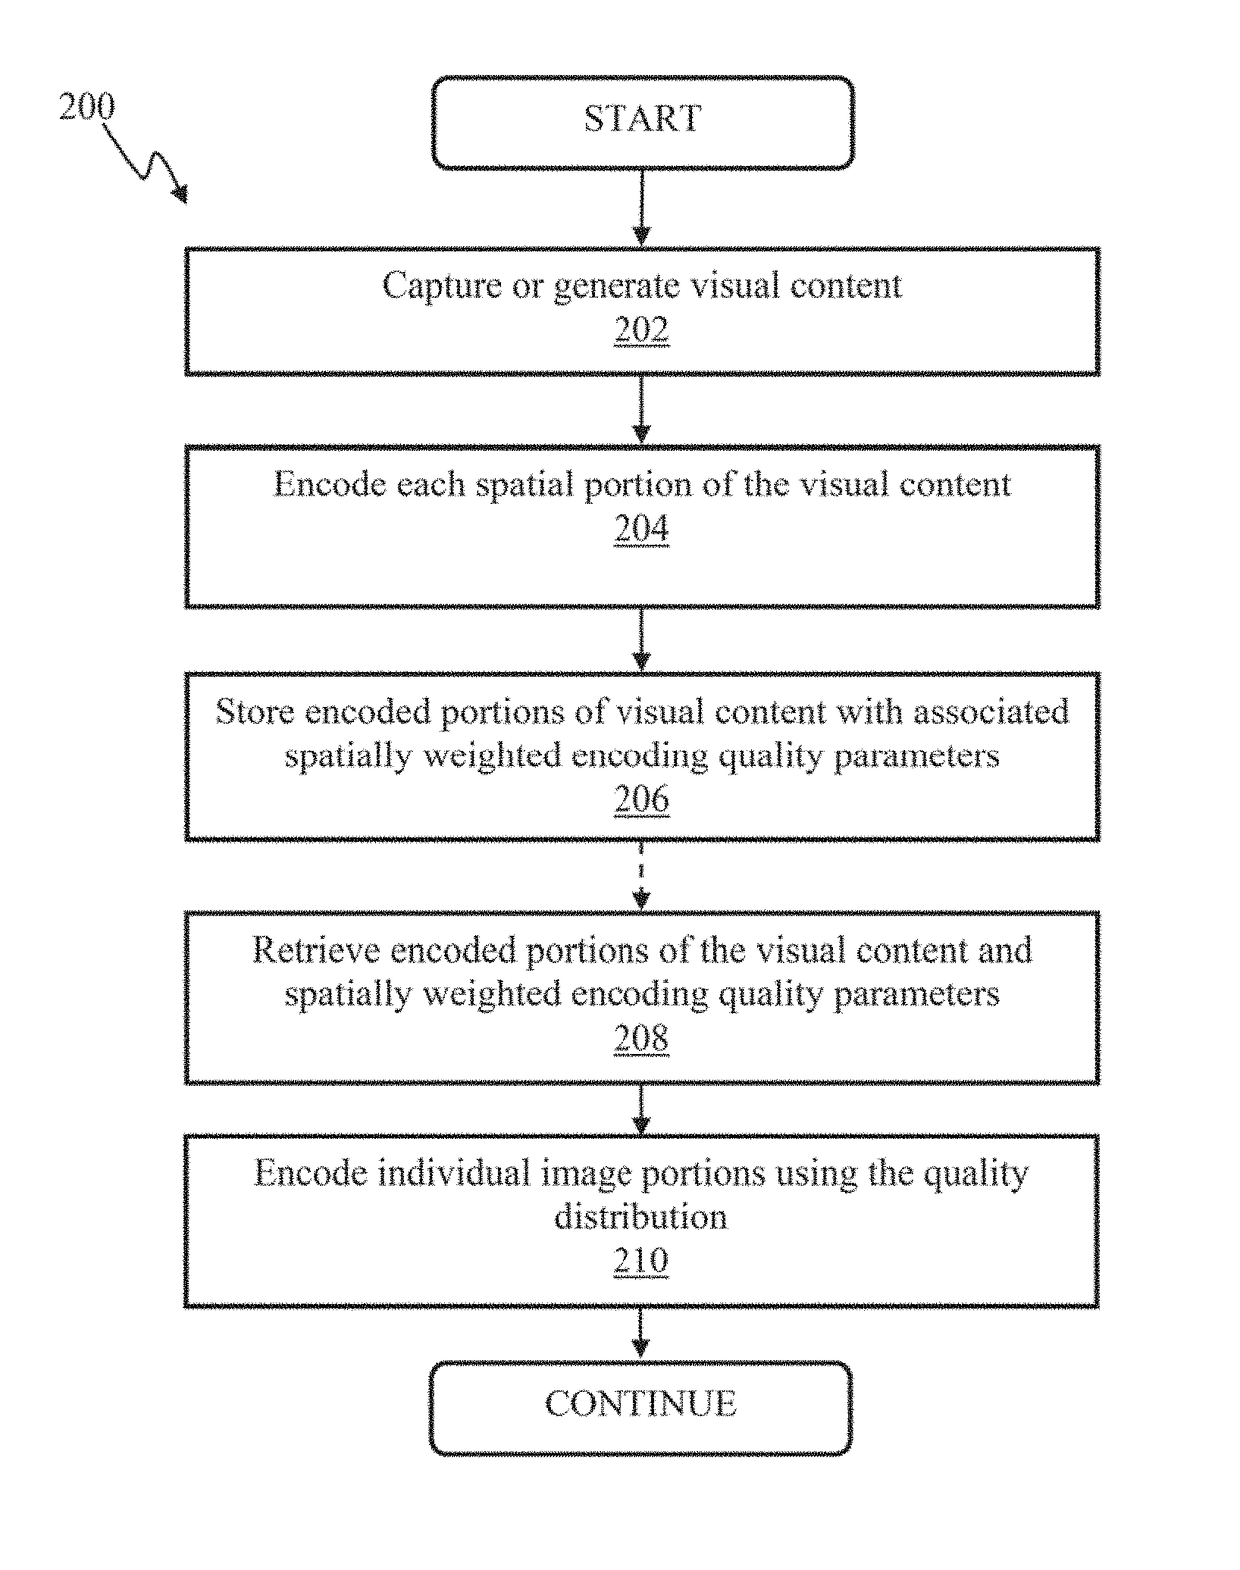 Apparatus and methods for image encoding using spatially weighted encoding quality parameters